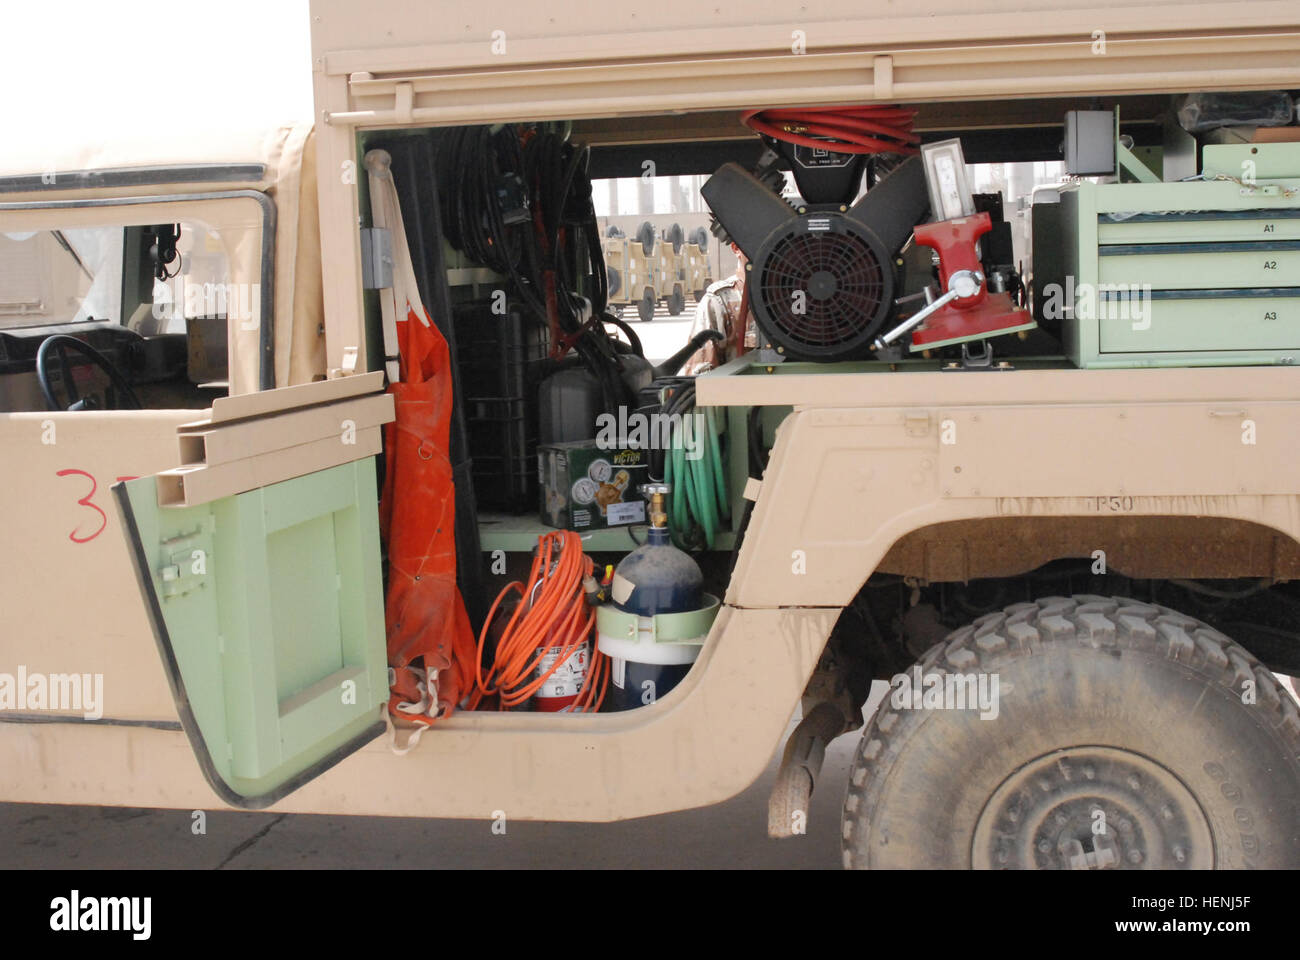 An Iraqi army shop equipment contact maintenance Humvee sits parked with dozens of other logistical support vehicles at the Old al Muthana vehicle warehouse in Baghdad, Iraq, March 26, 2008. This equipment was procured by the Ministry of Defence through the foreign military sales program. (U.S. Army photo by Capt. David F. Roy/Released) Iraqi army shop equipment contact maintenance Humvee Stock Photo